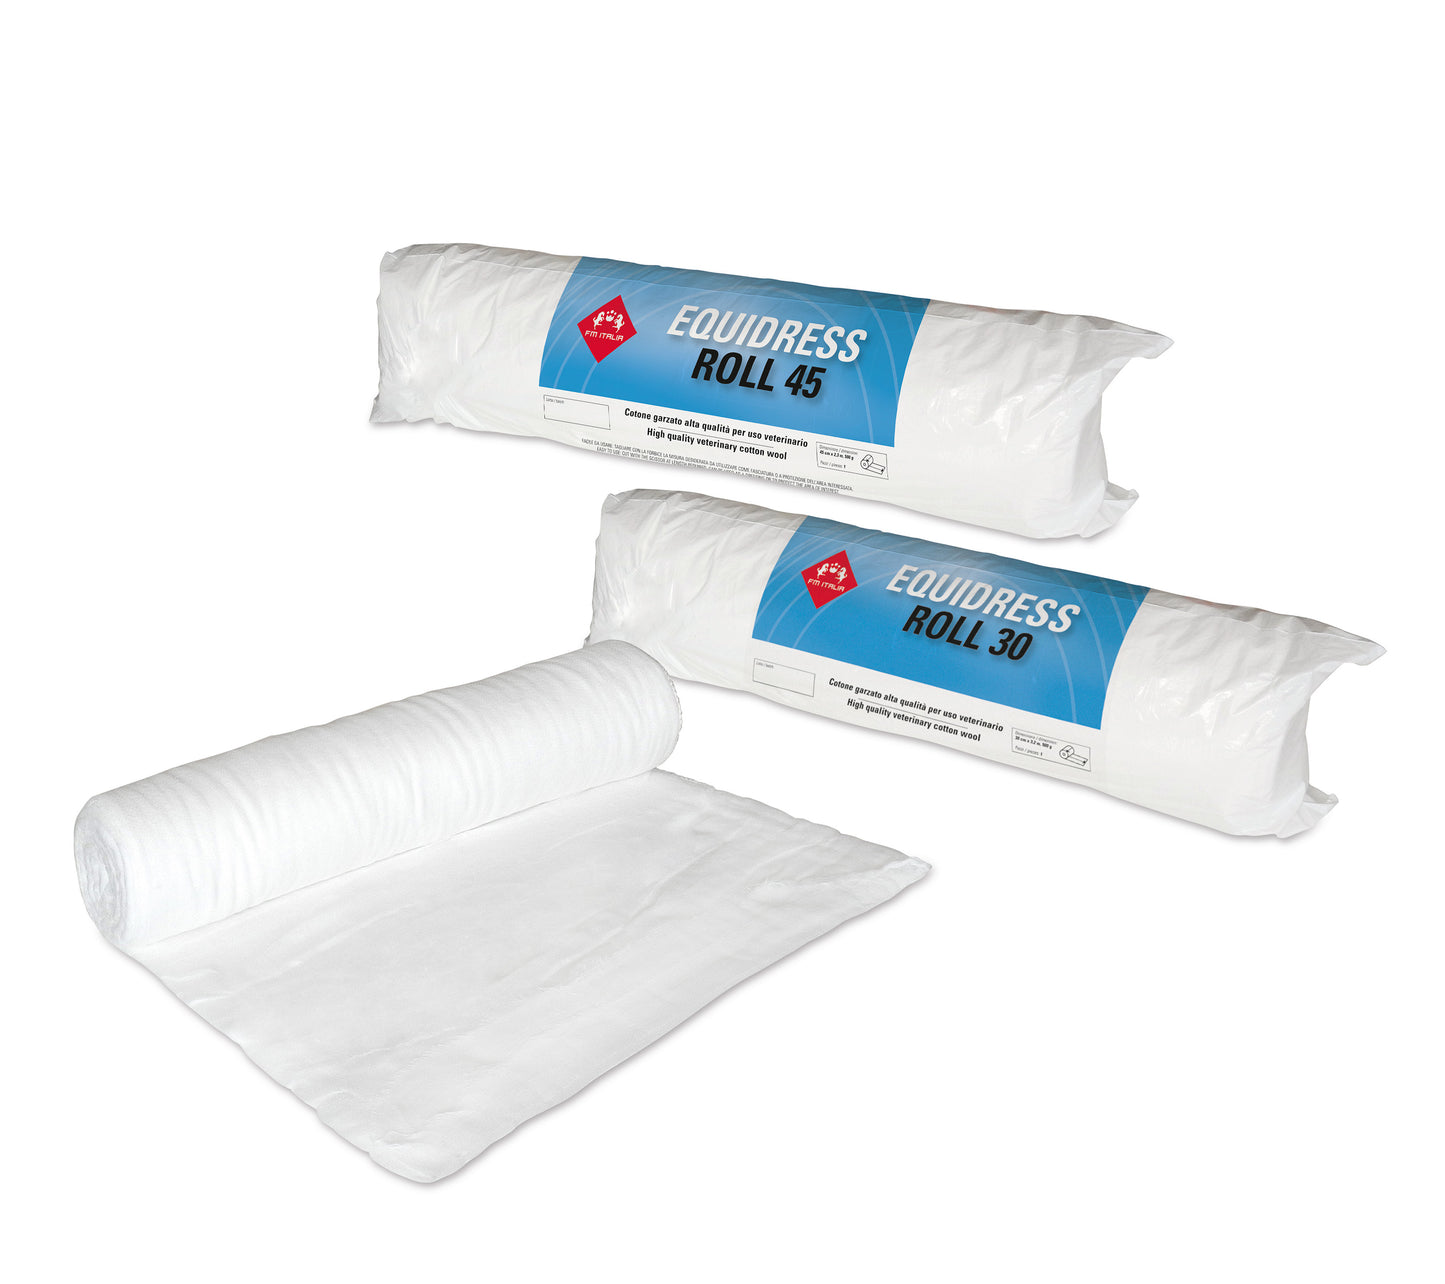 EQUIDRESS ROLL | High-Quality Veterinary Cotton Wool for Limb, Tendon, and Joint Protection